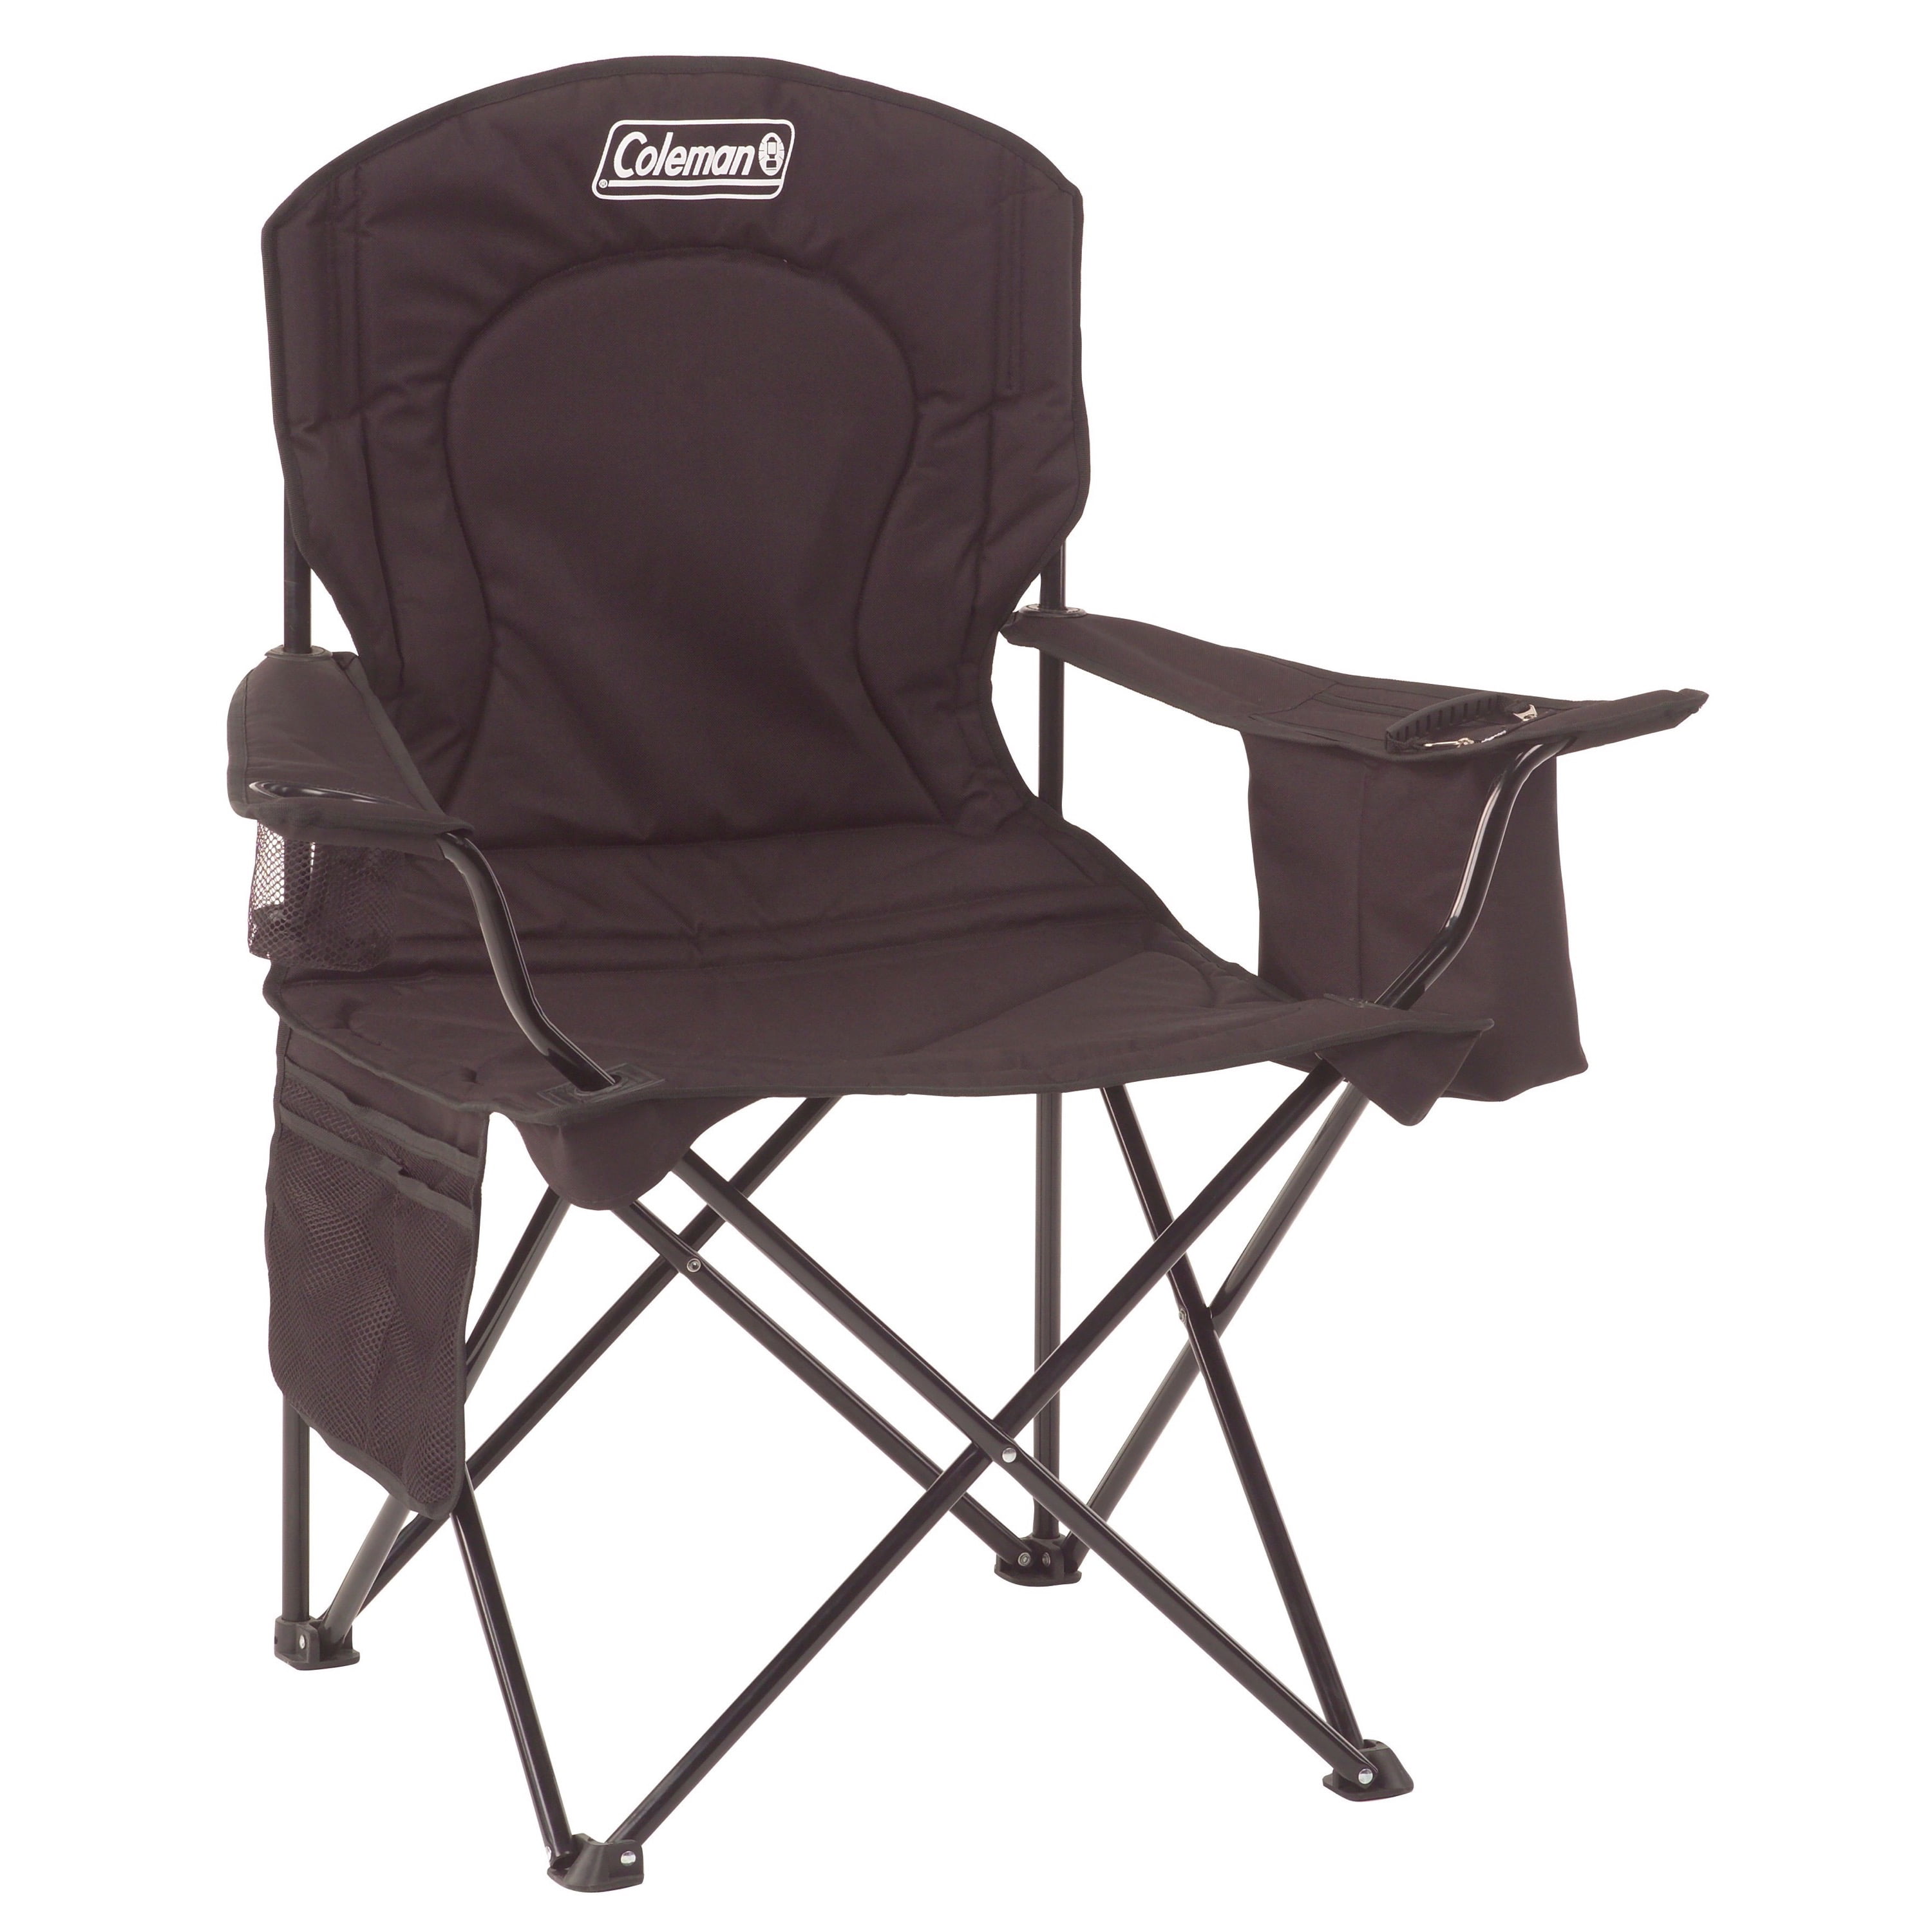 coleman oversized quad chair with cooler